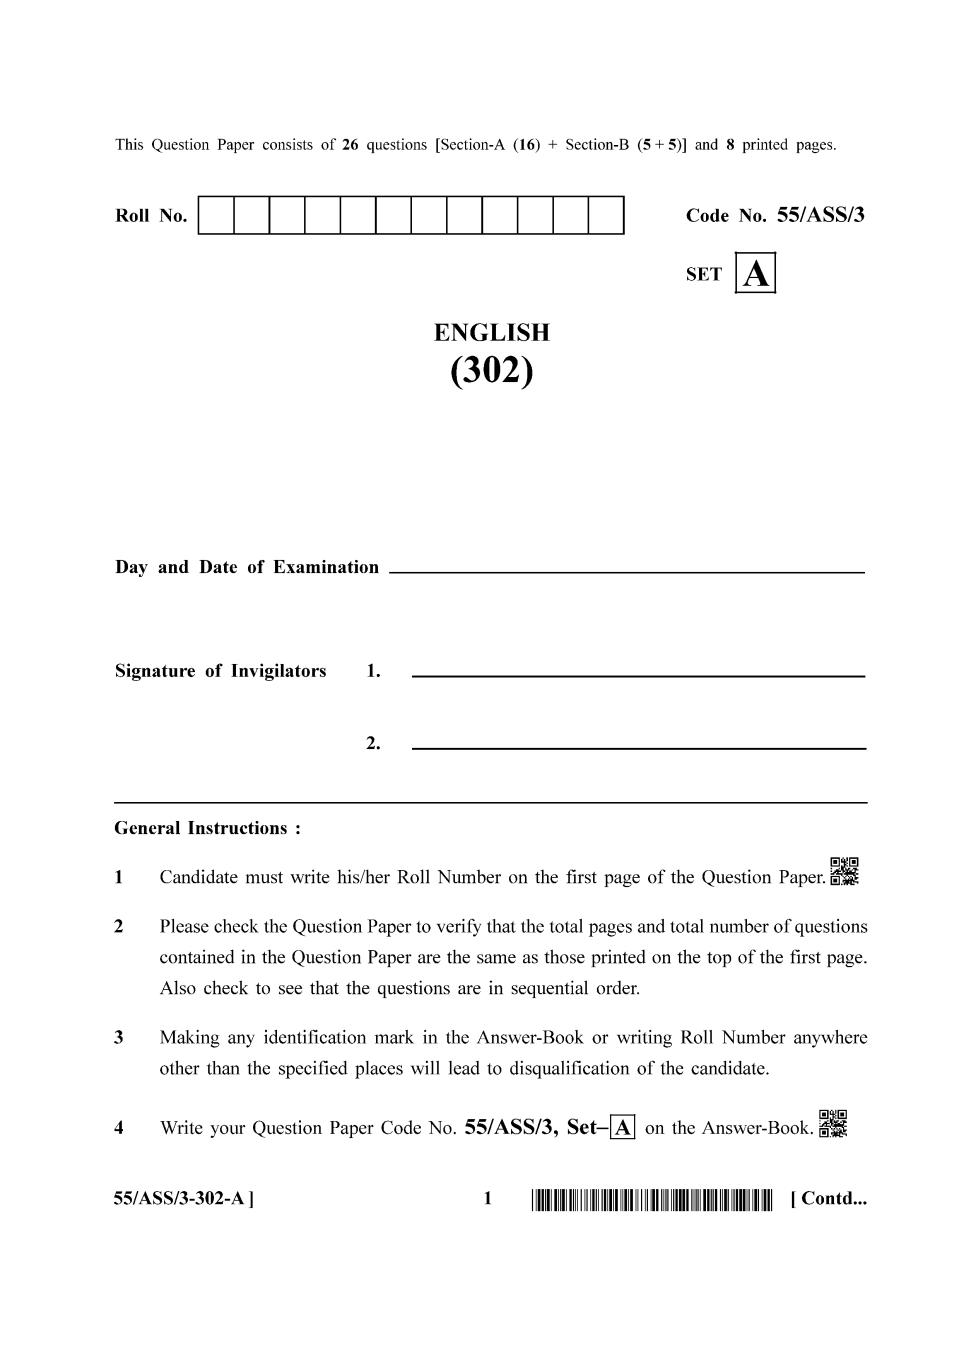 NIOS Class 12 Question Paper Oct 2017 - English - Page 1